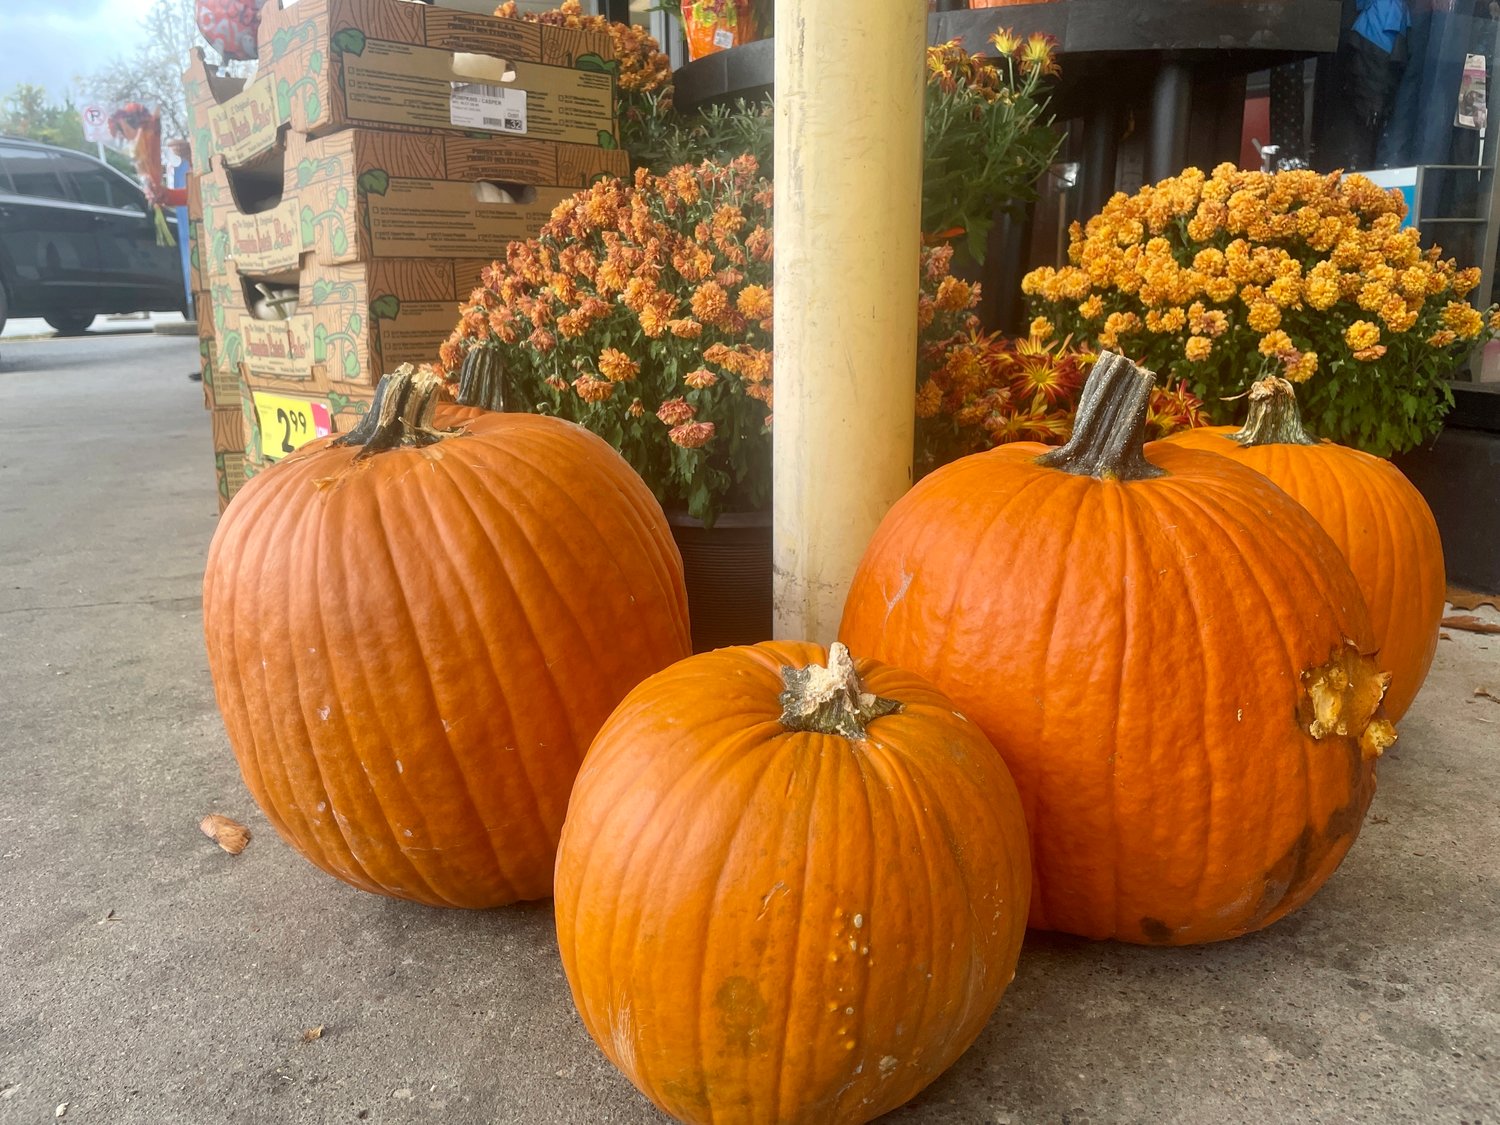 Pumpkins for sale are displayed on Monday, Oct. 31, 2022, at a grocery store in Cross Lanes, W.Va. (AP Photo/John Raby)